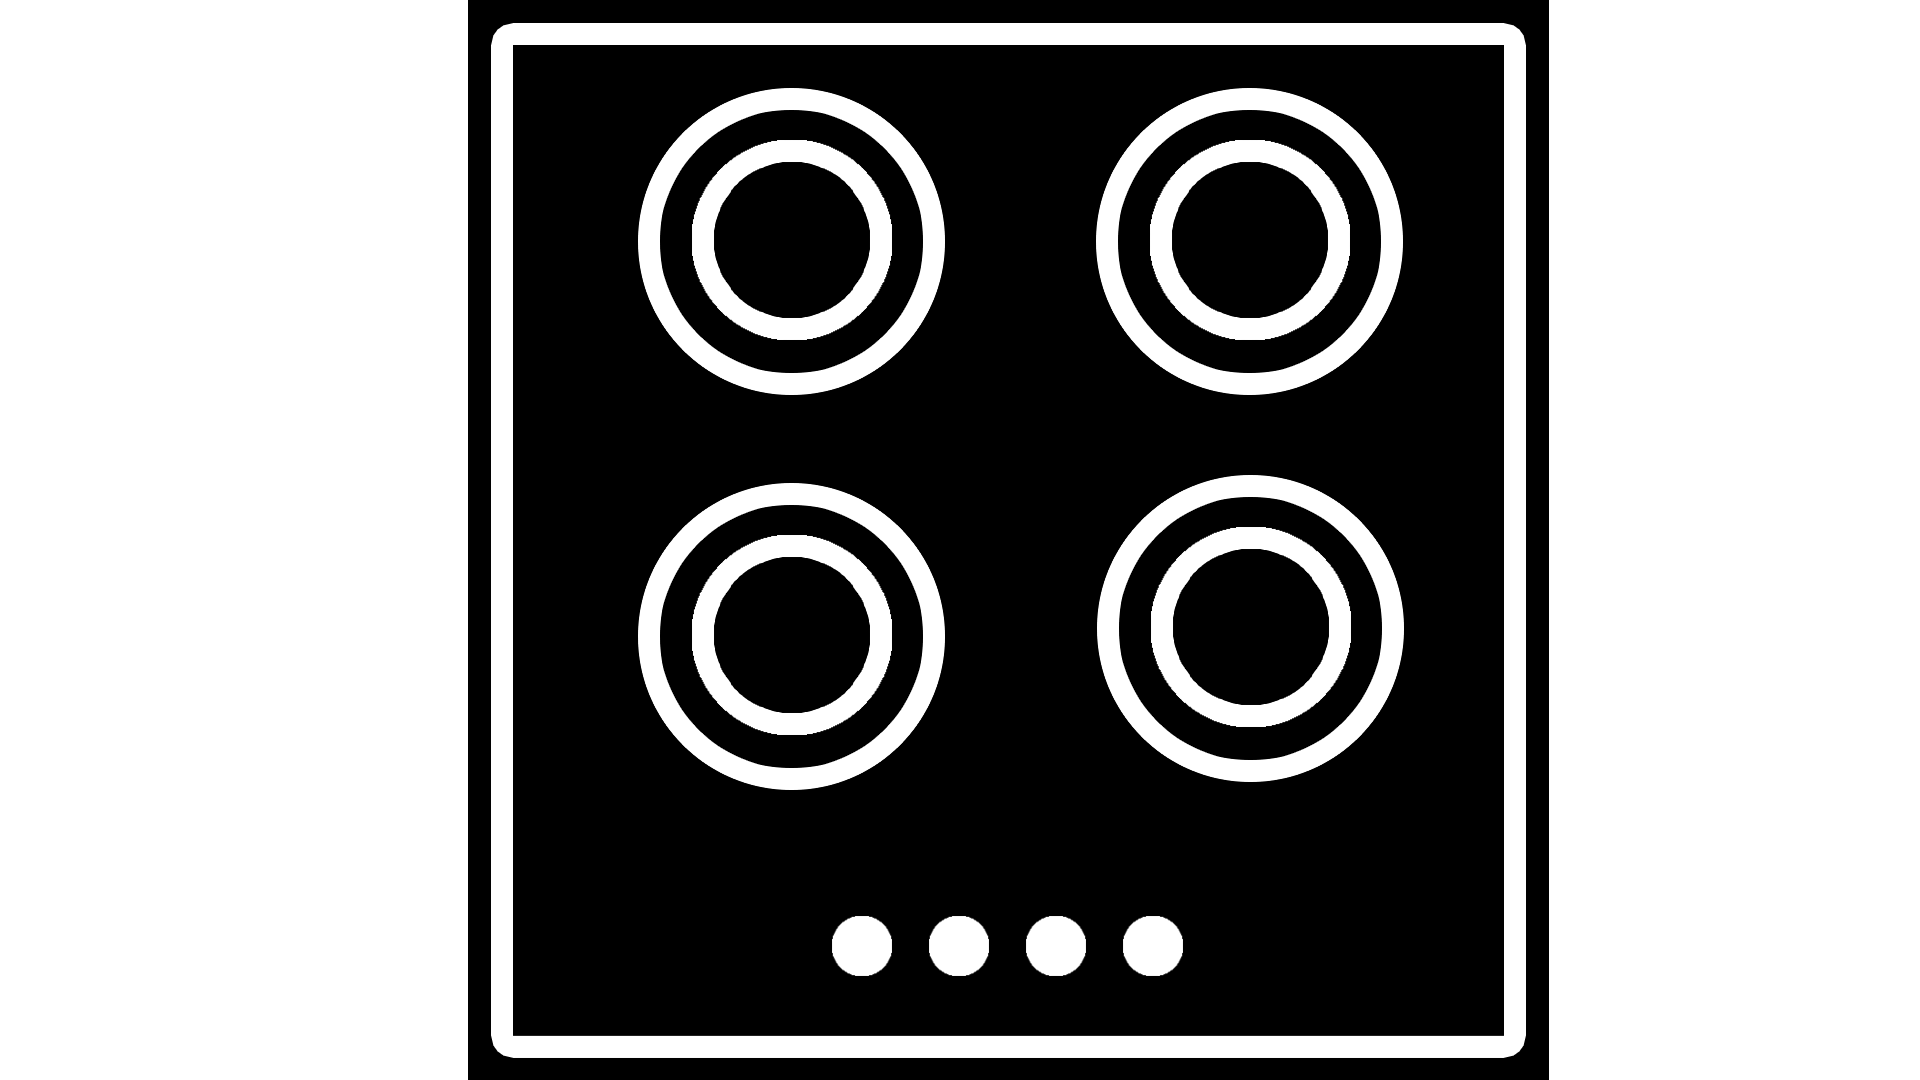 cooktop icon, black background, 4 white burners and knobs